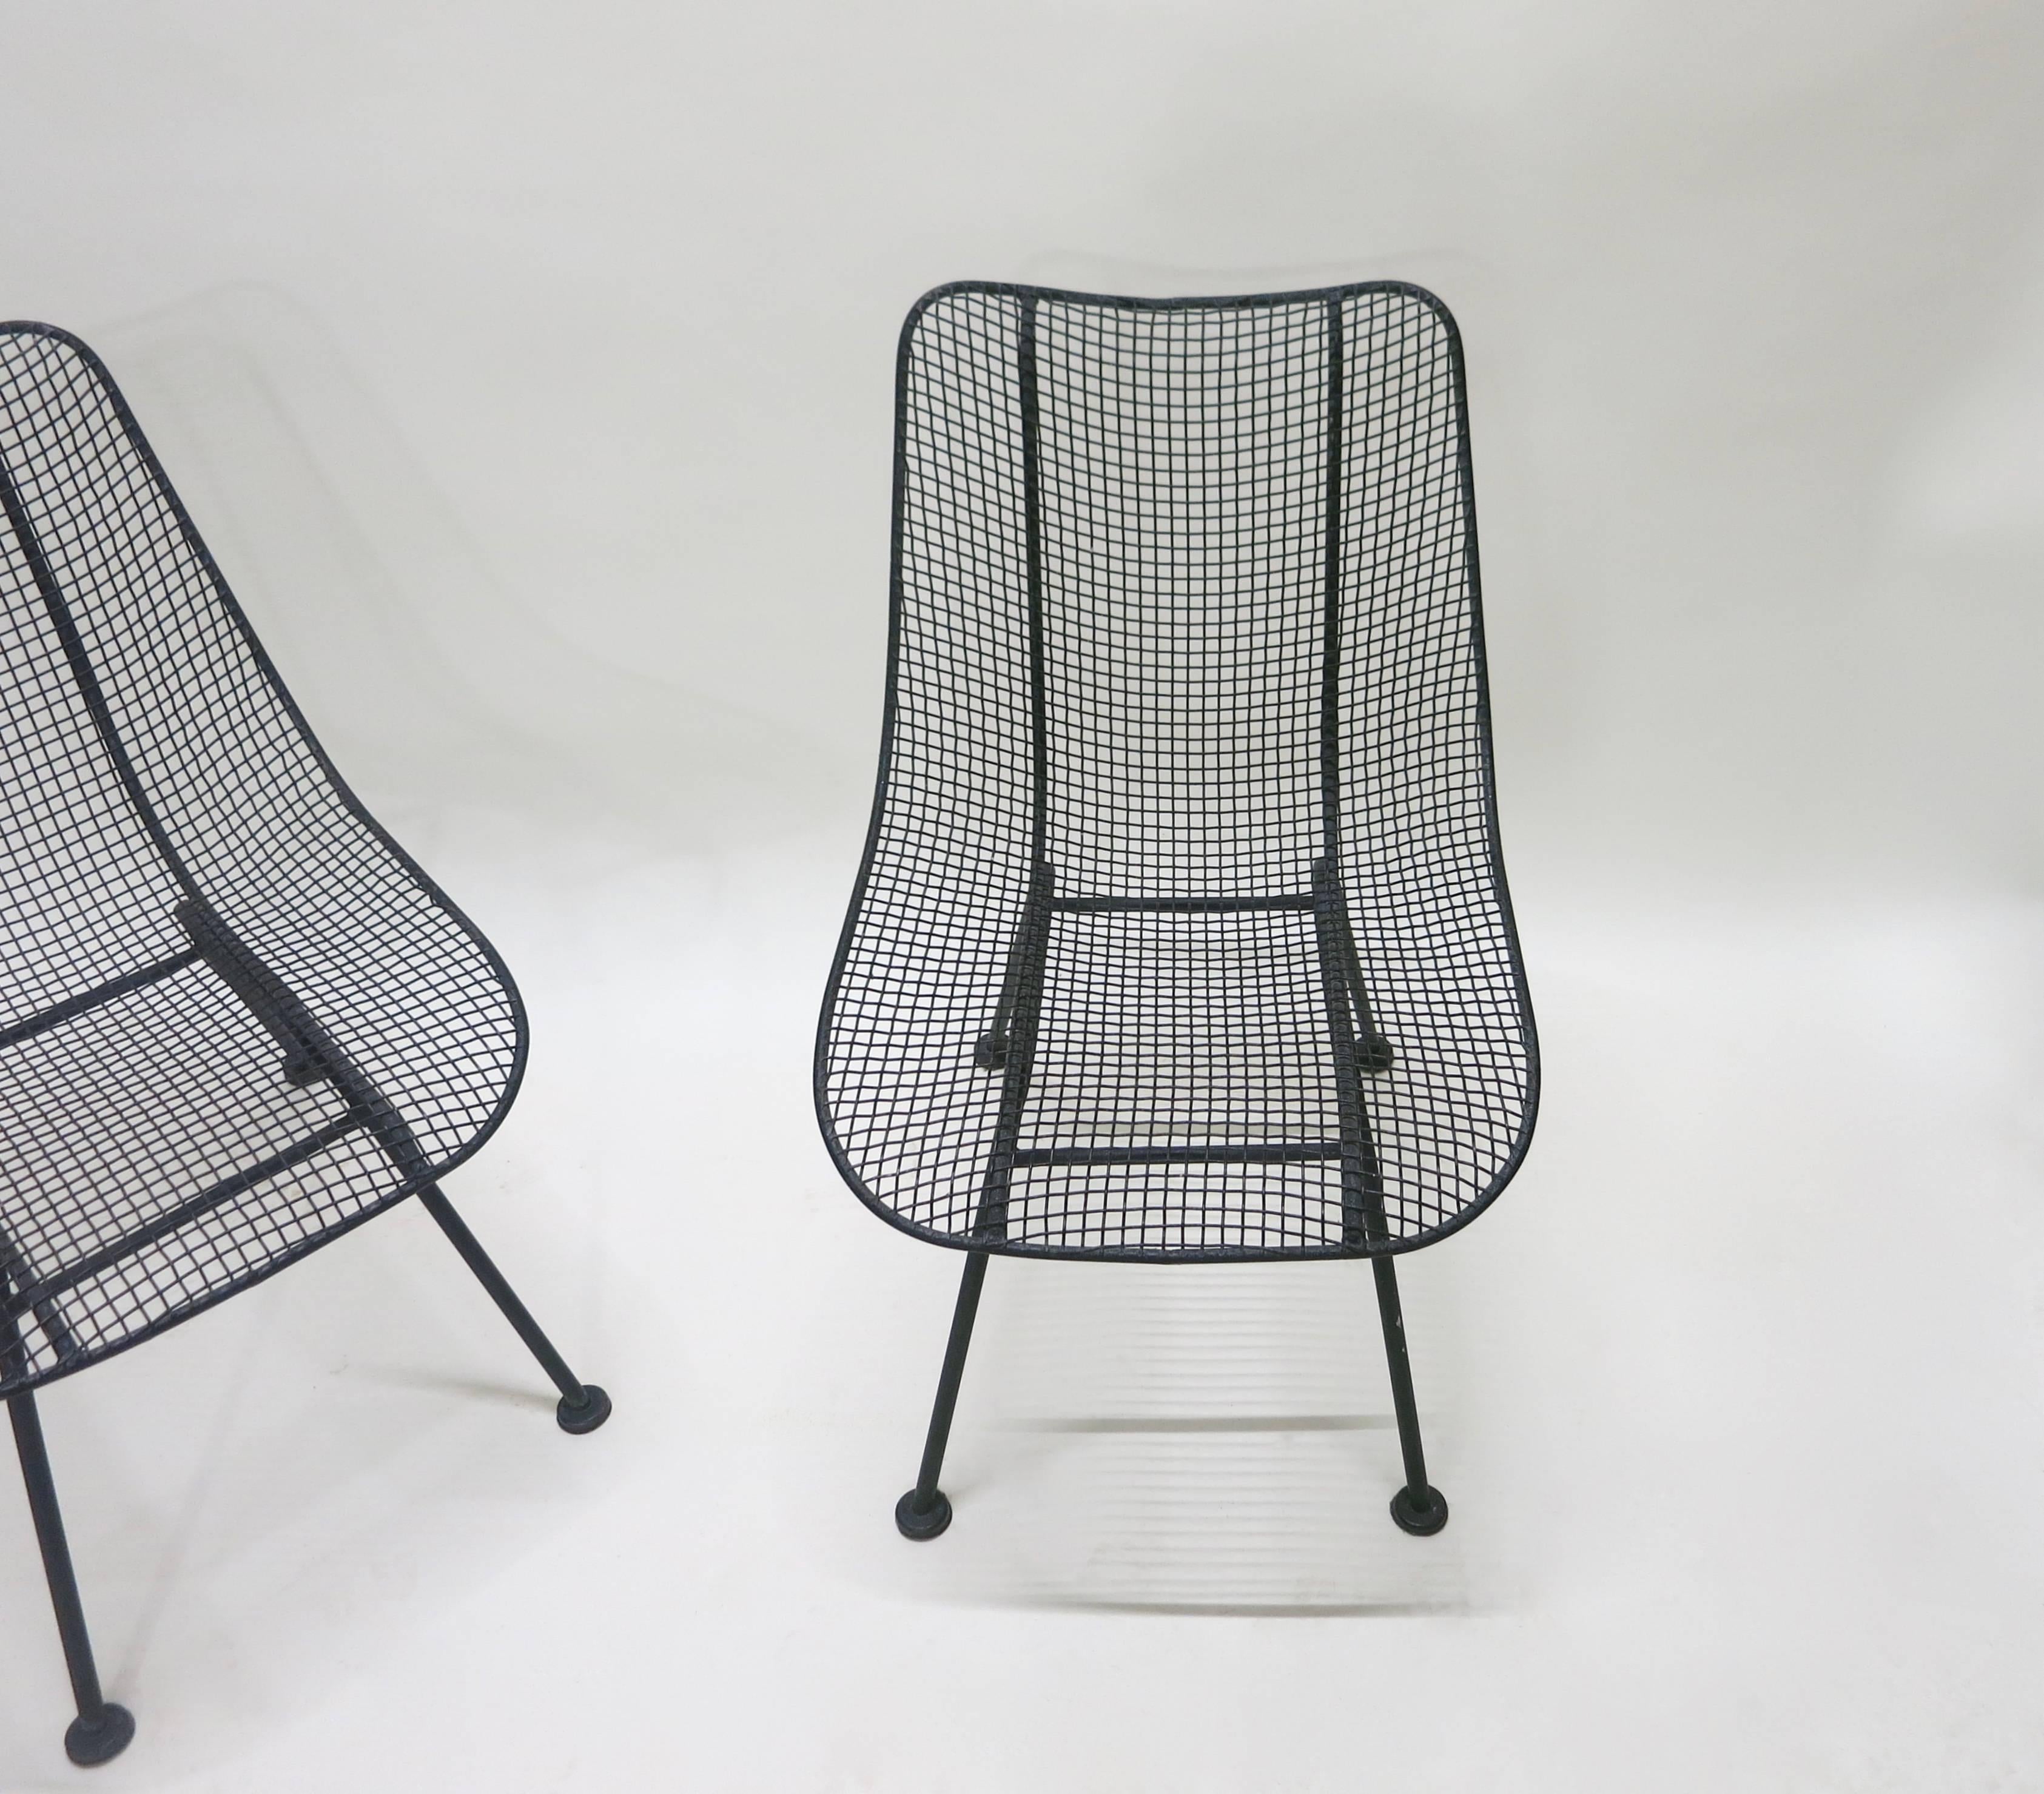 Four vintage, outdoor armless dining chairs from Woodard's 'Sculptura' line, powder coated in a matte charcoal grey-black finish. All four in excellent condition.